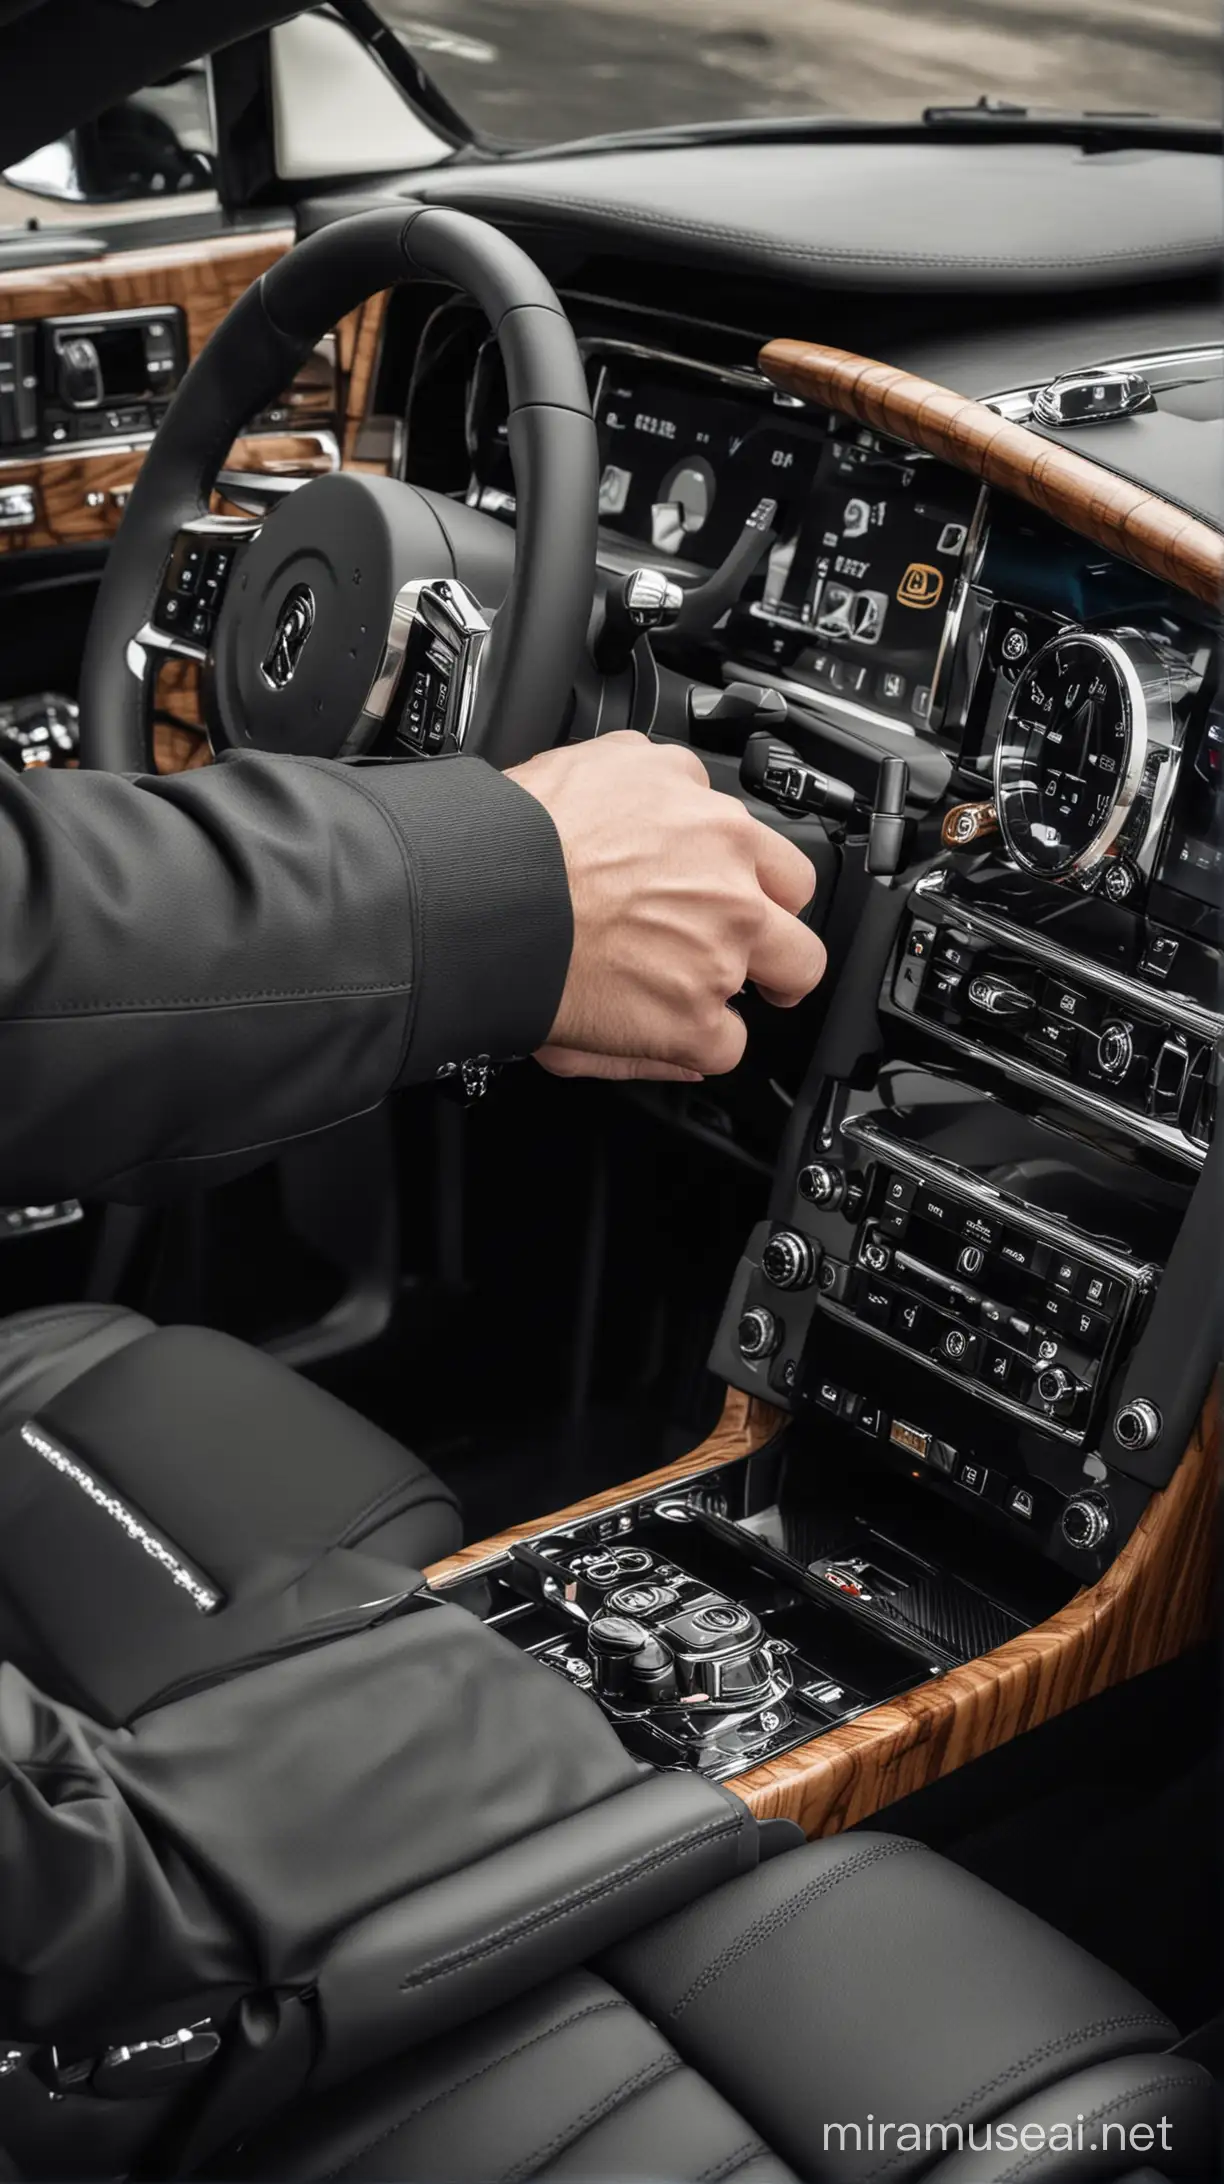 Generate an image from the driver's perspective inside a luxurious Rolls Royce Cullinan Black Badge, modified by Mansory. The driver's hand is positioned on the steering wheel, showcasing a prestigious Jacob & Co. watch on the wrist. The interior exudes opulence, with premium leather upholstery, exquisite wood trim, and state-of-the-art technology seamlessly integrated. The driver is captured in a moment of exhilaration, confidently navigating the road ahead in unparalleled comfort and style.